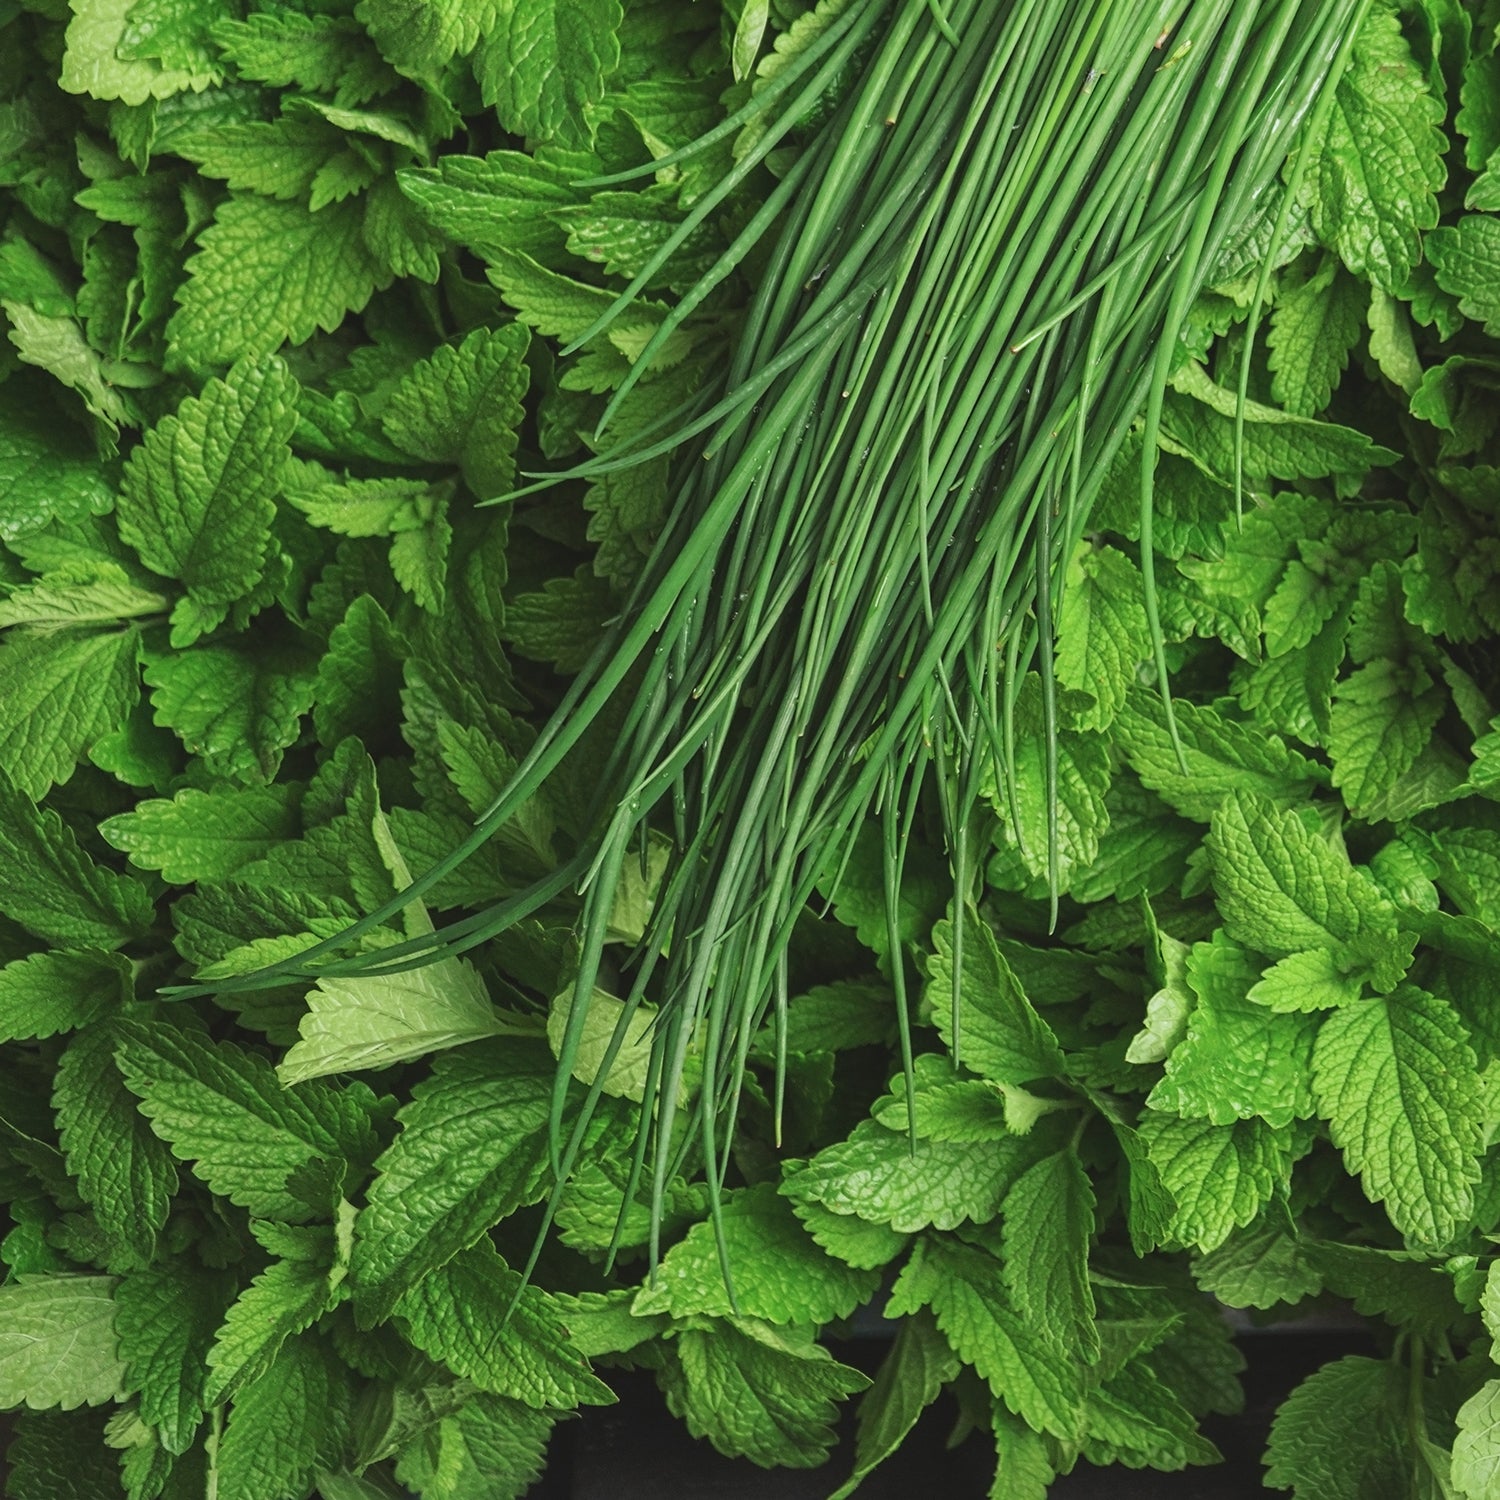 A close-up photo of mint leaves, one of the main fresh scents in the "Eucalyptus Mint" scented candle from Tuscany Candle